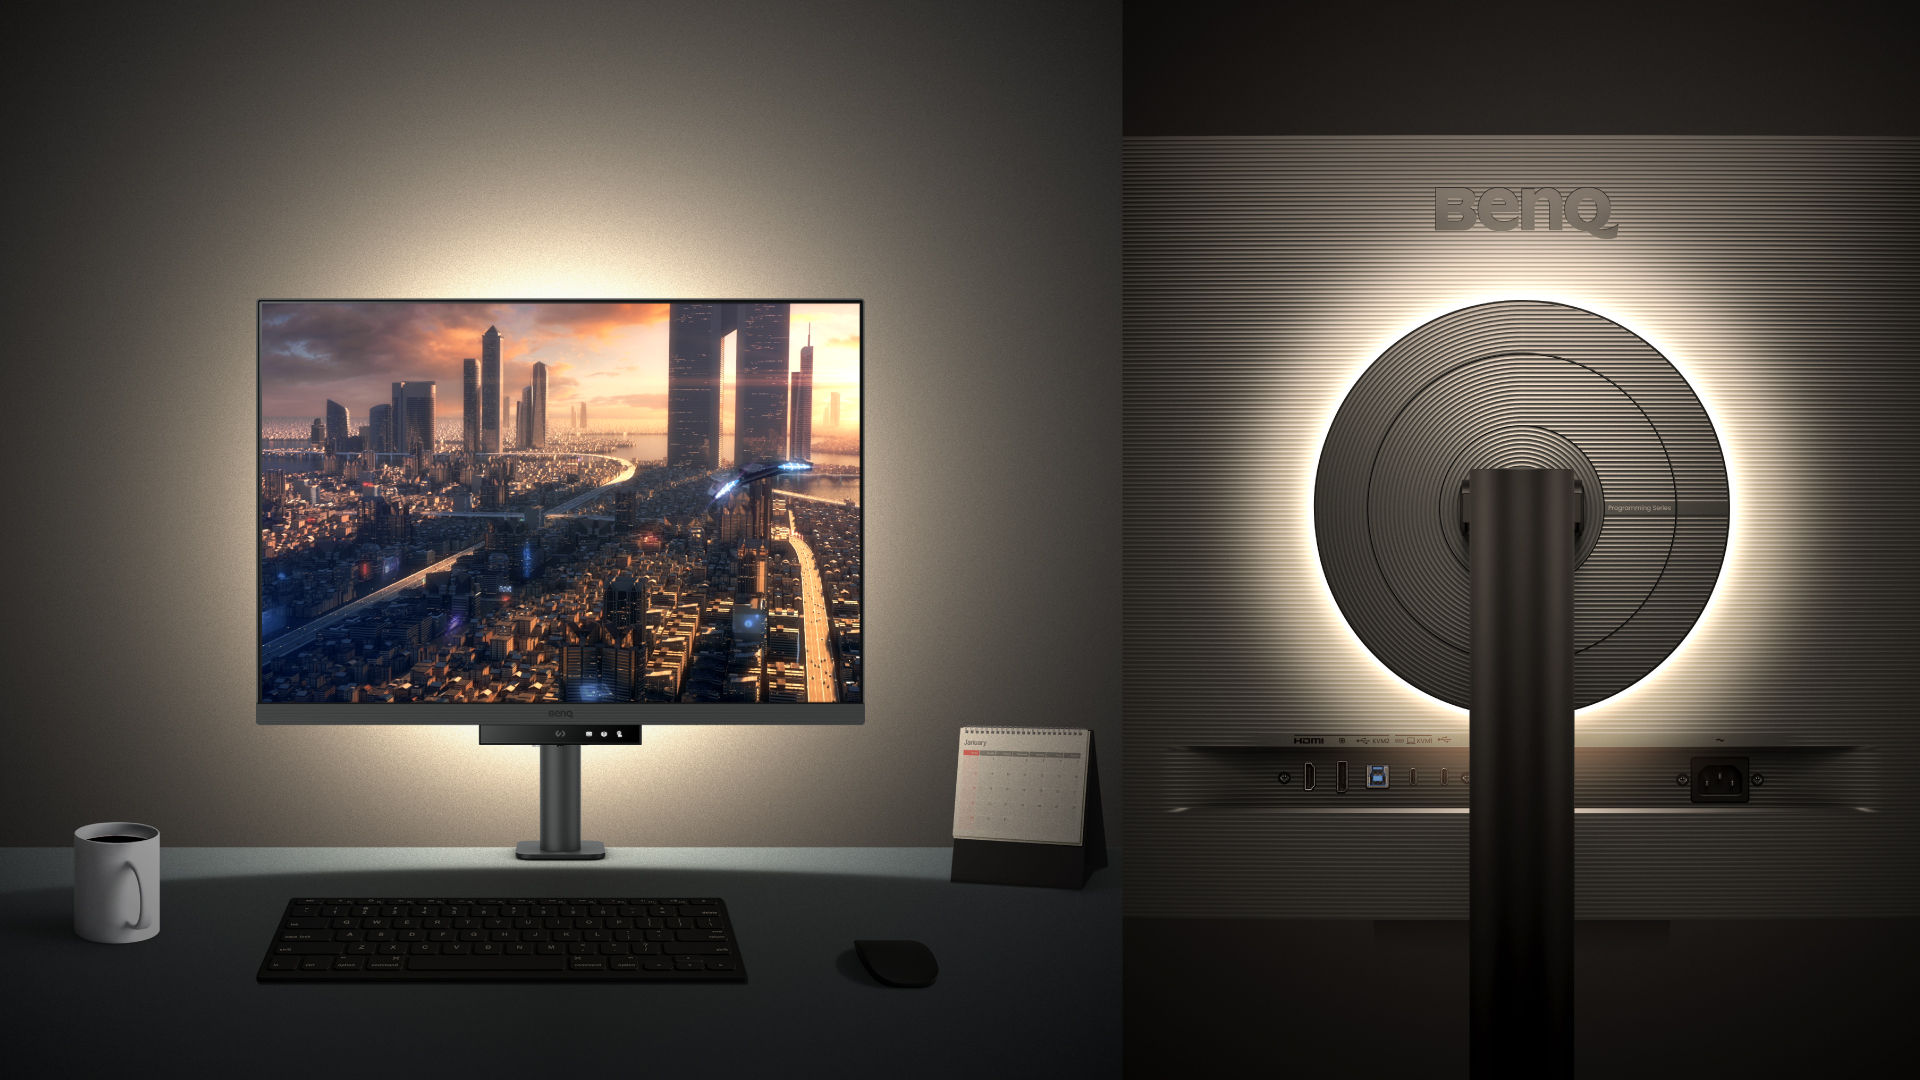 BenQ RD Series programming monitors feature exclusive MoonHalo bias lighting, designed to enhance the coding experience during late-night sessions with optimal ambient lighting conditions that support extended periods of focused work.